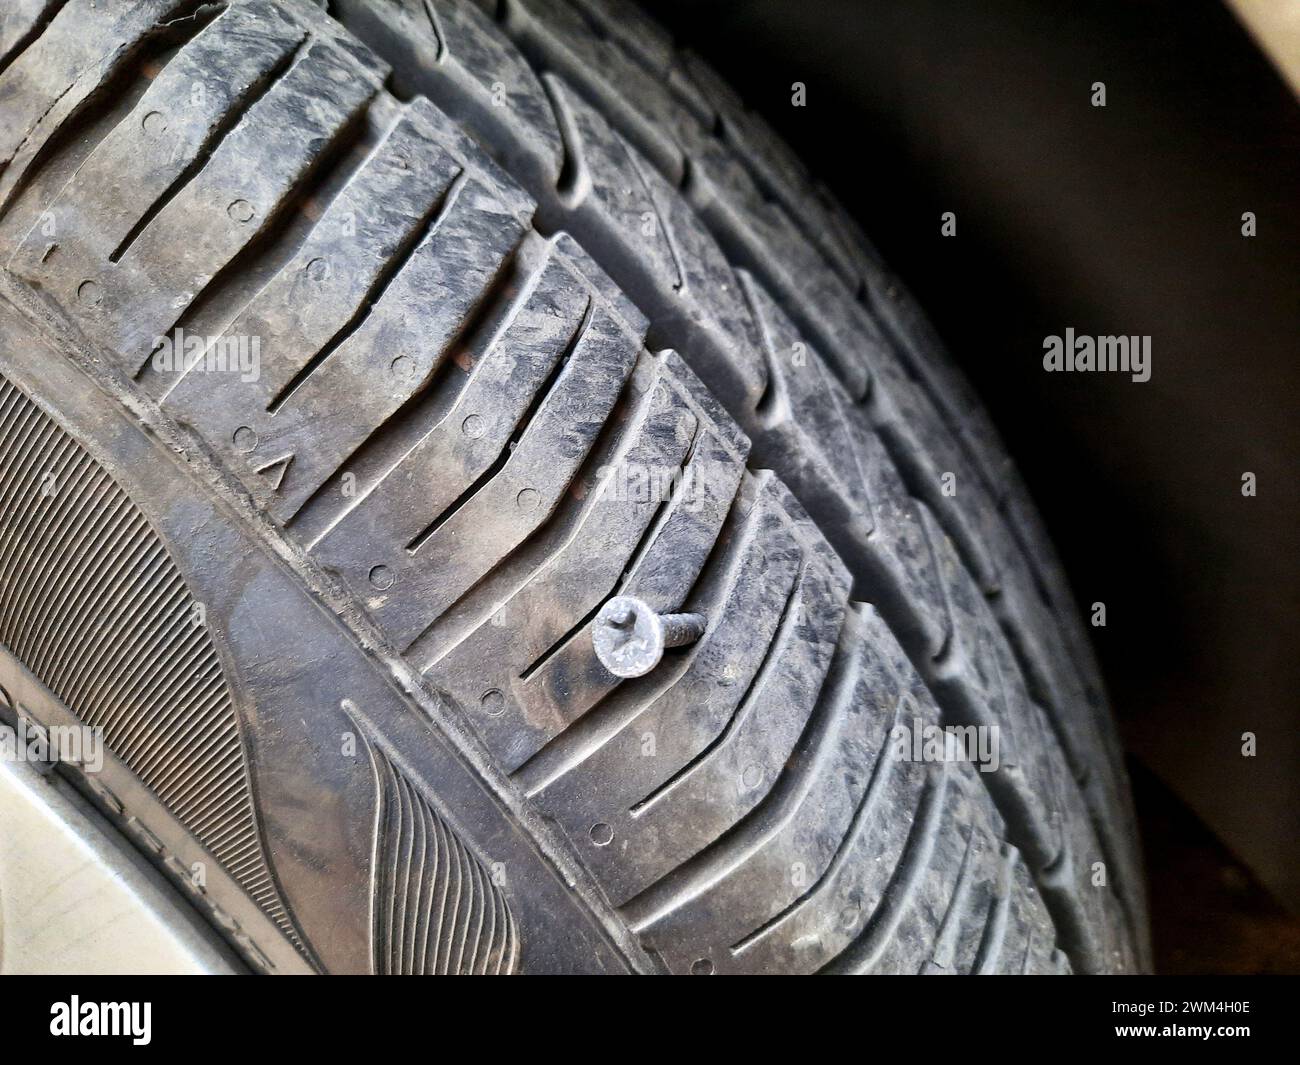 How to Tell if Your Tire Was Slashed | GetJerry.com